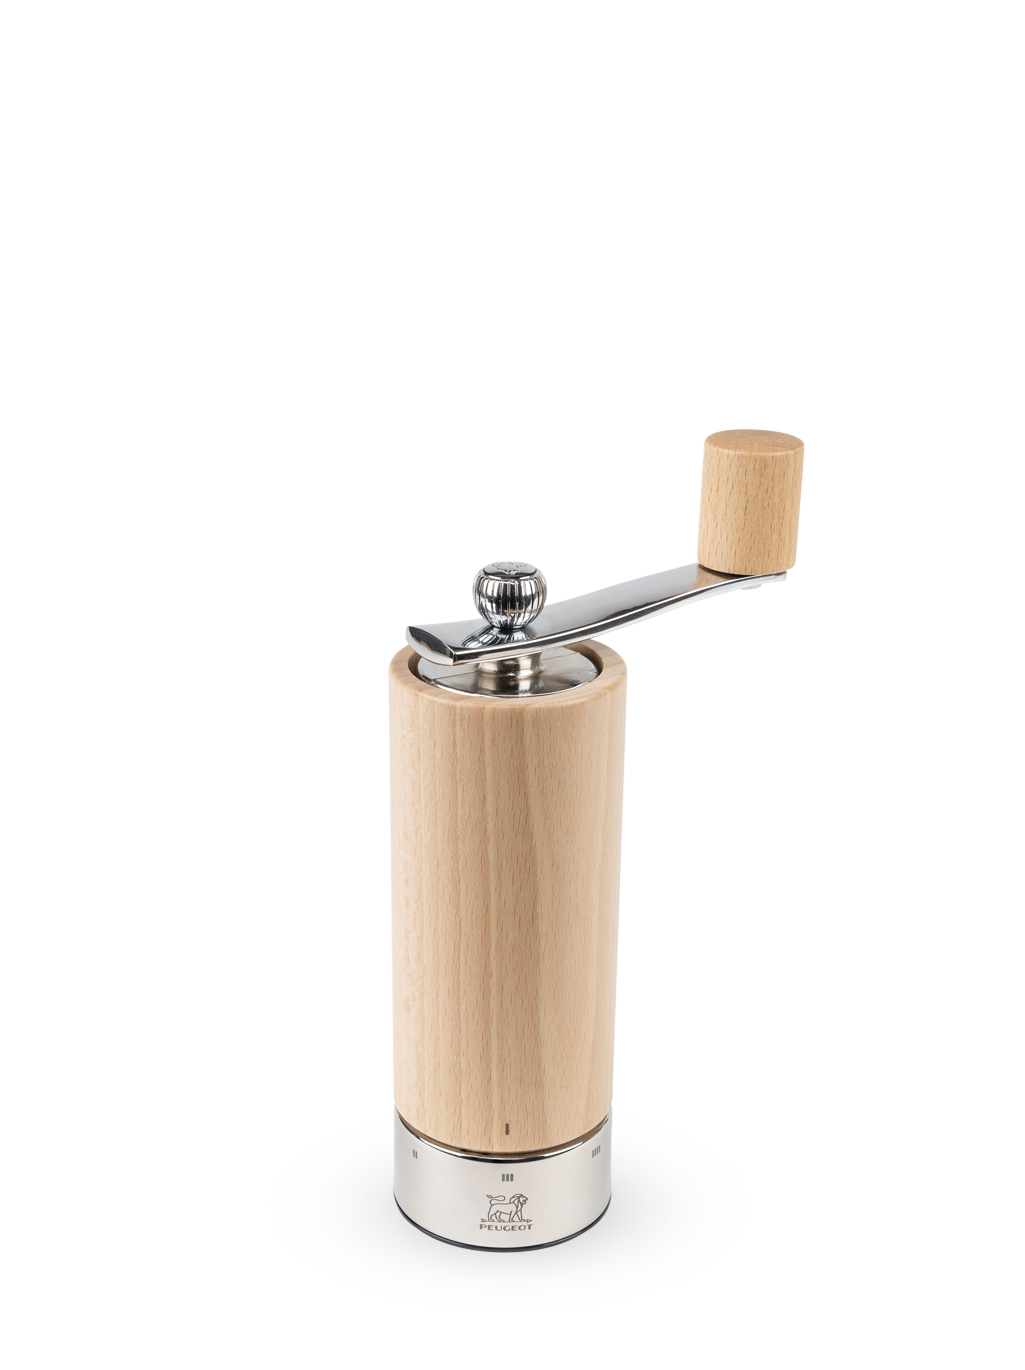 Peugeot Isen u'Select Pepper Mill with Crank Handle in natural wood, 18 cm